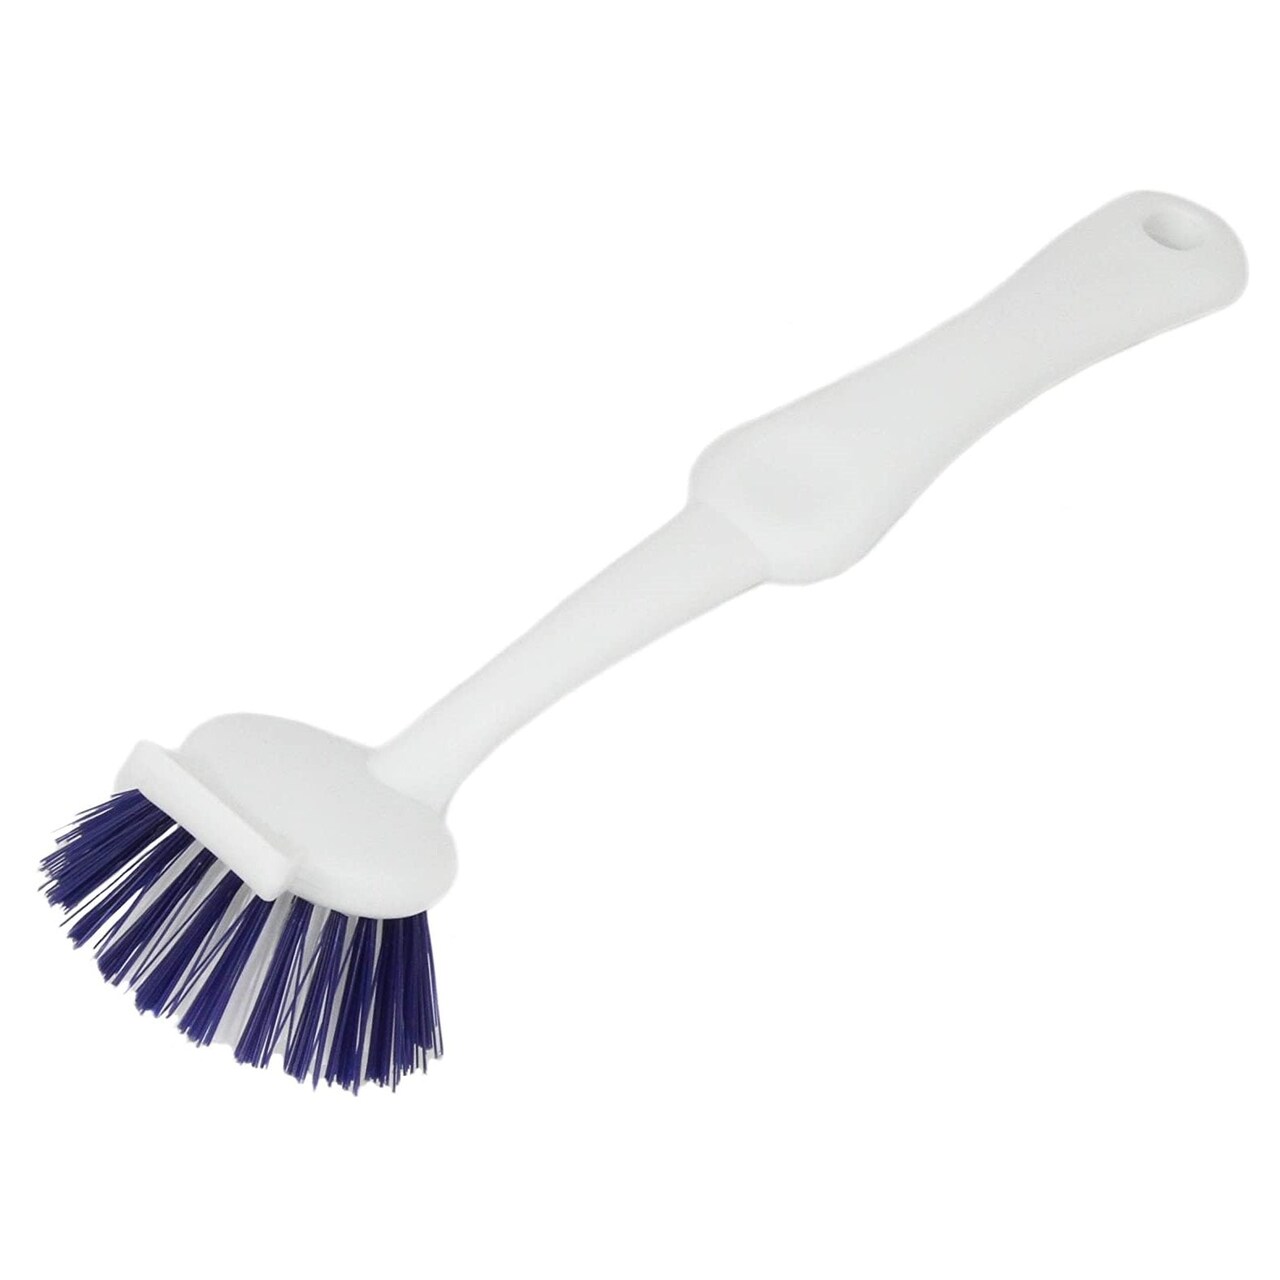 Chef Craft 9.5 Long Vegetable Scrubber Brush and Pan Cleaning Scraper